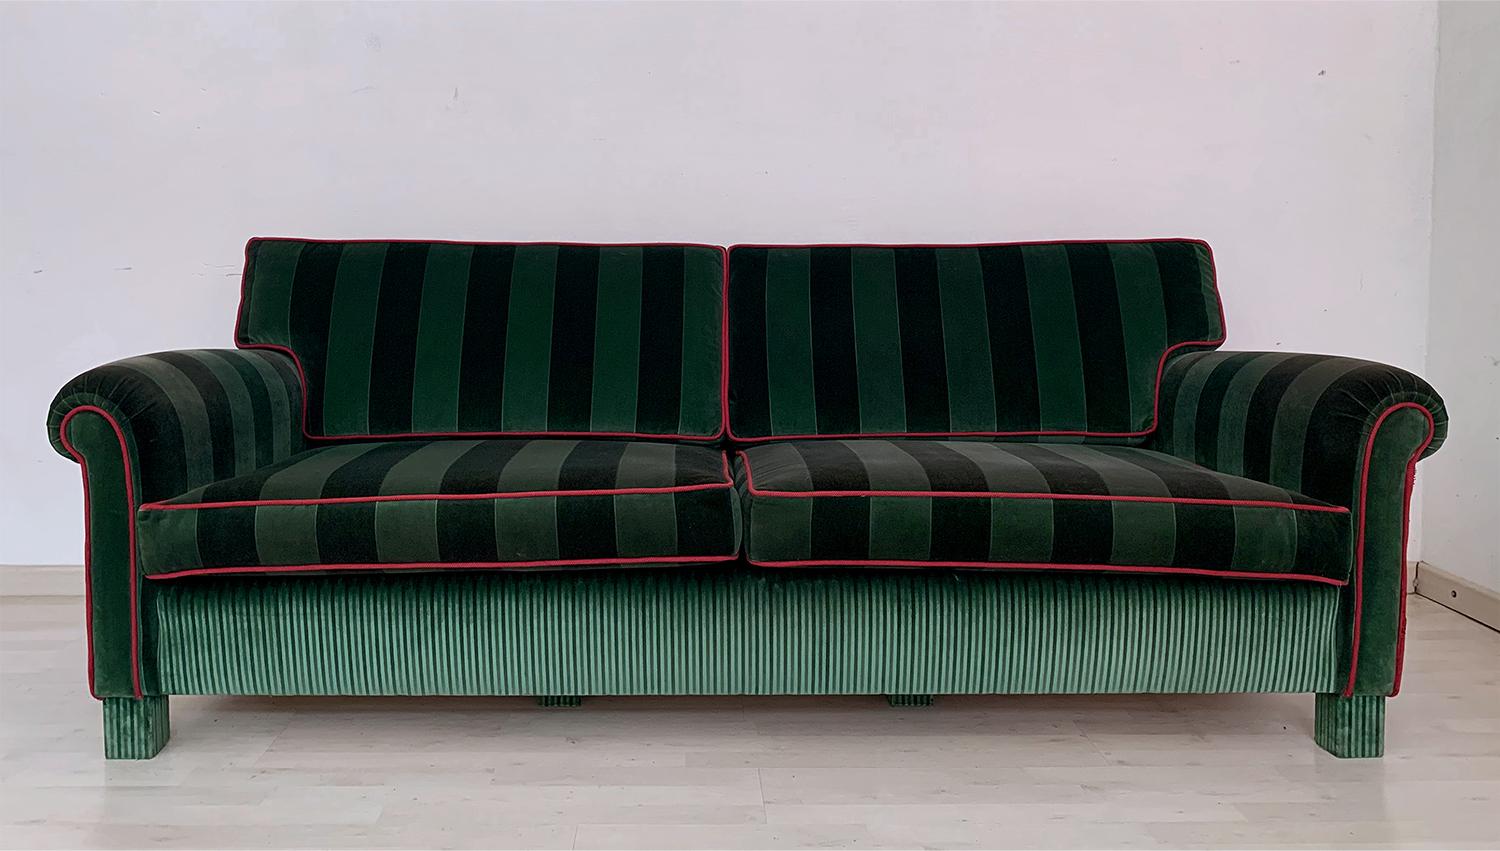 An elegant Italian sofa from the 1960s, with deep and very comfortable seating to provide a relaxing seat.
The structure is very sturdy, supported by cubic wooden feet, and is entirely upholstered in a beautiful green velvet with a wide vertical